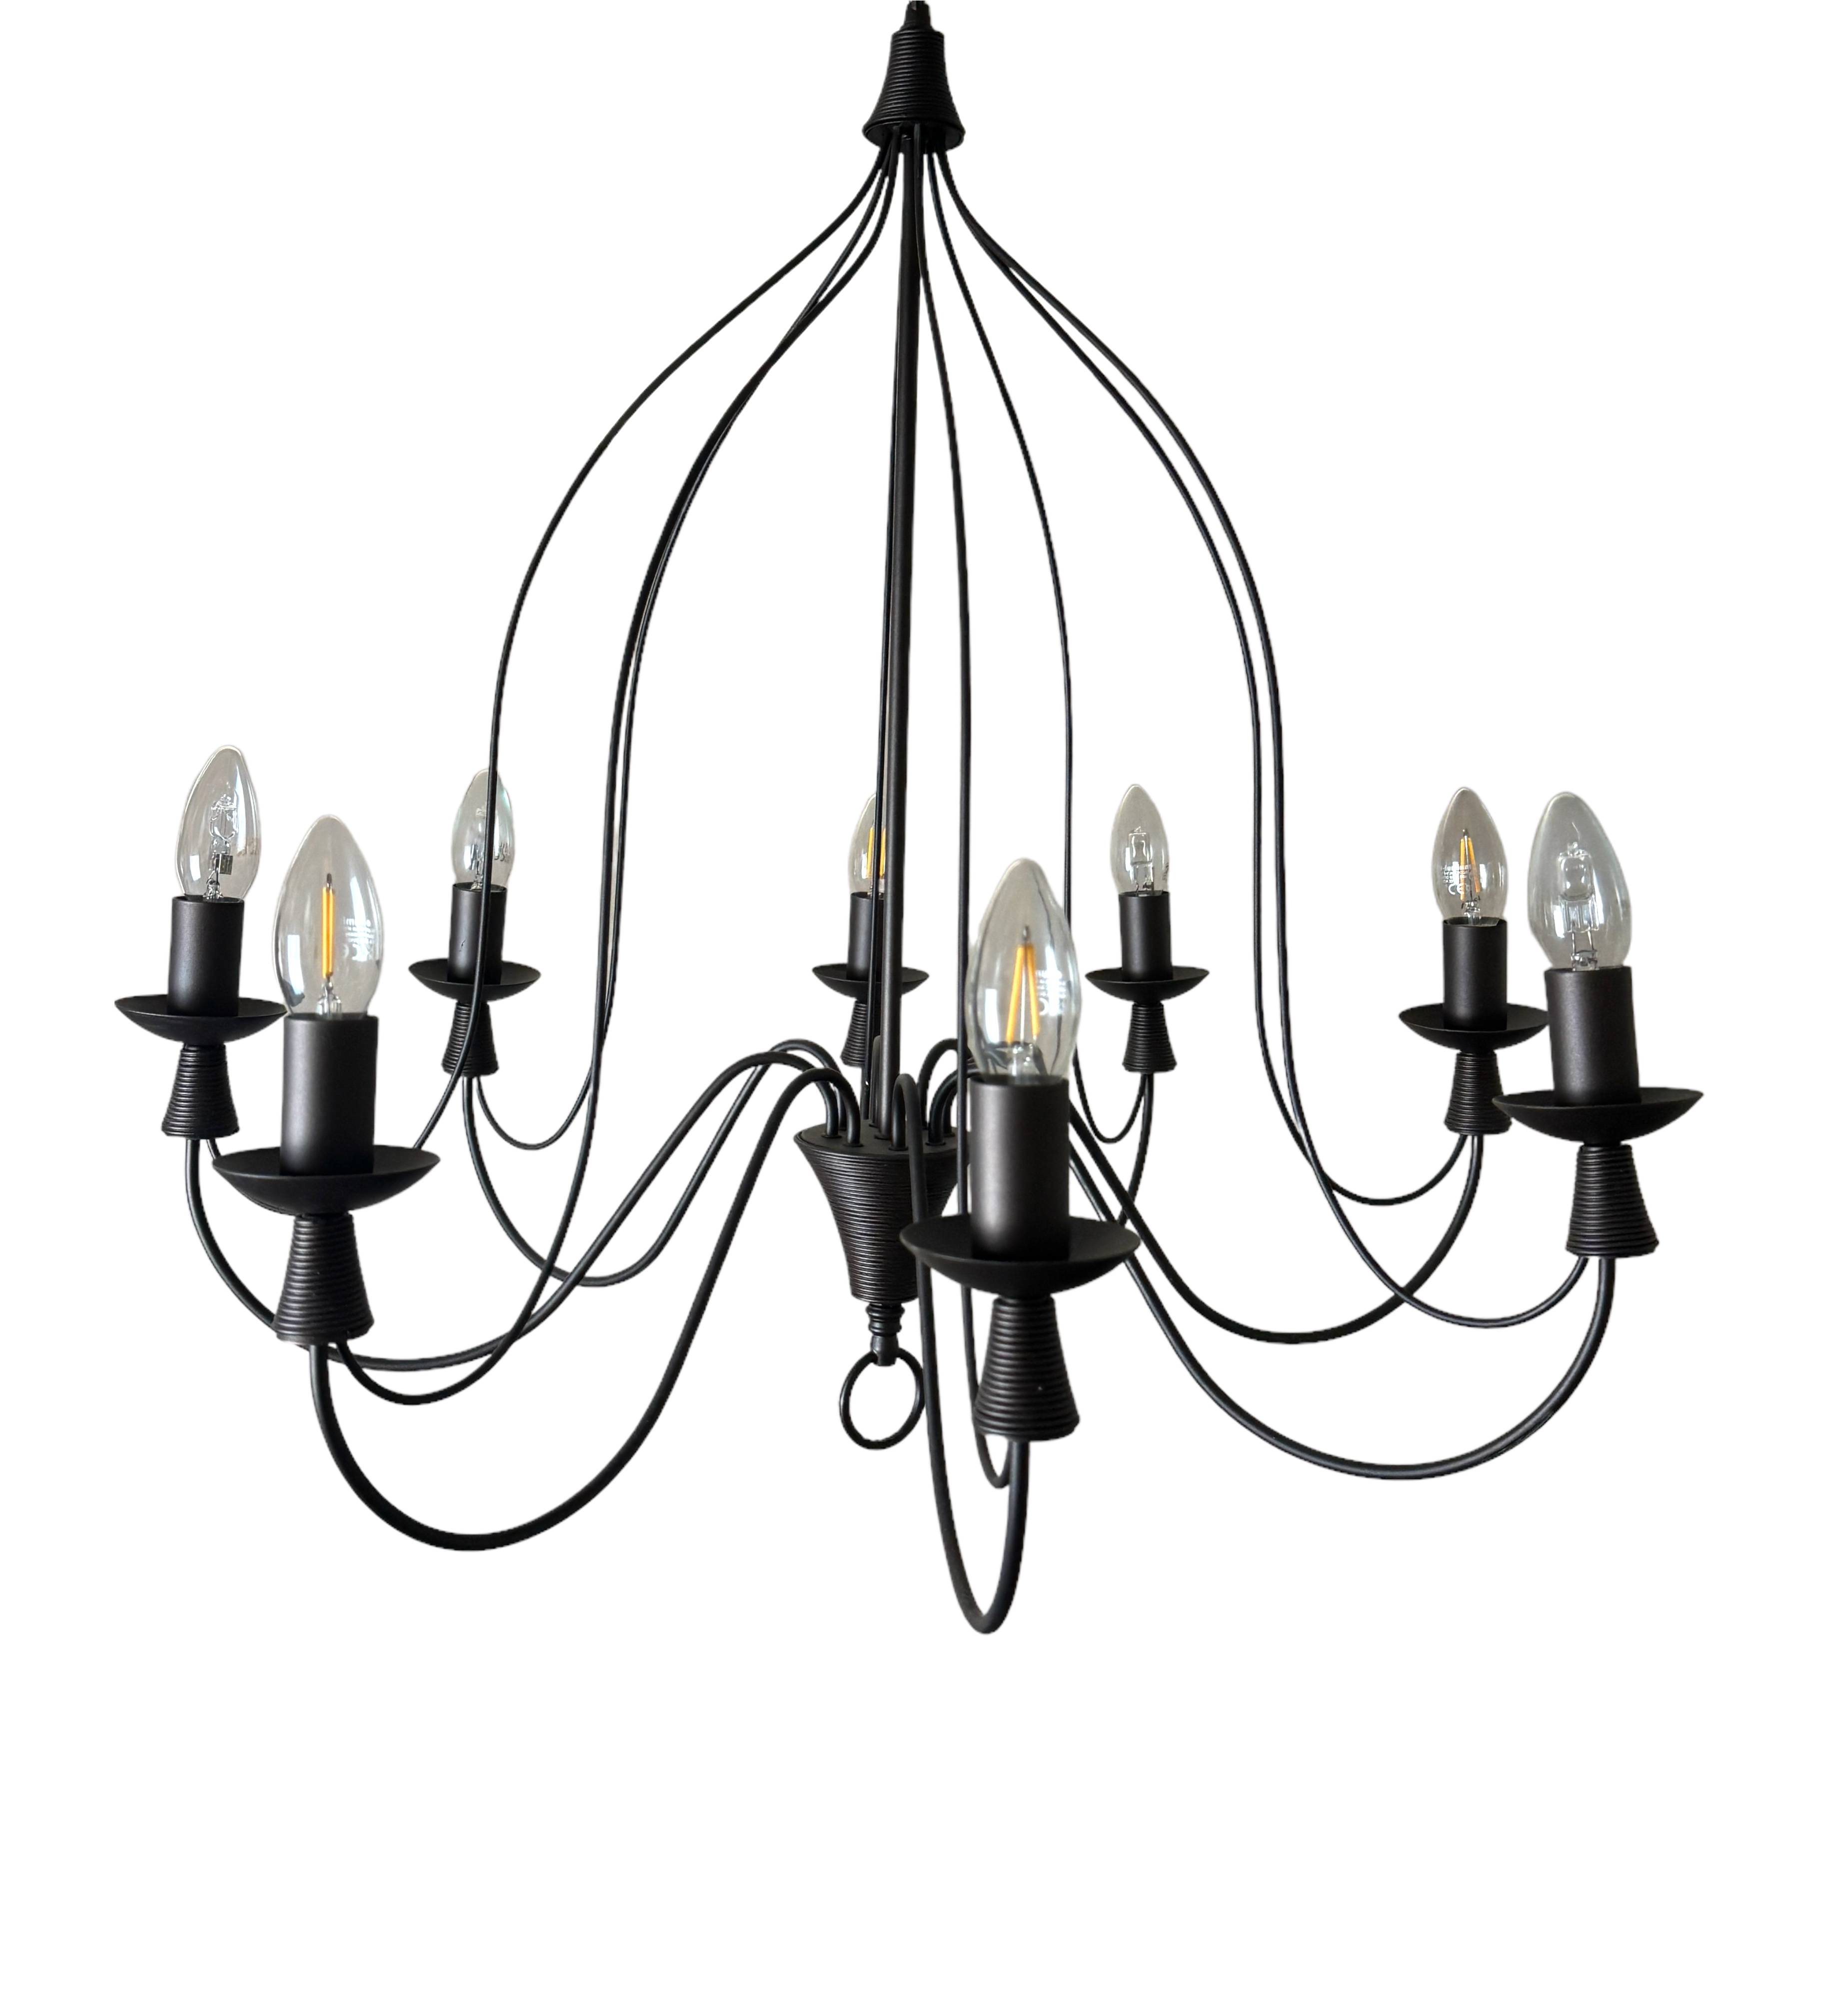 A contemporary black painted eight branch chandelier